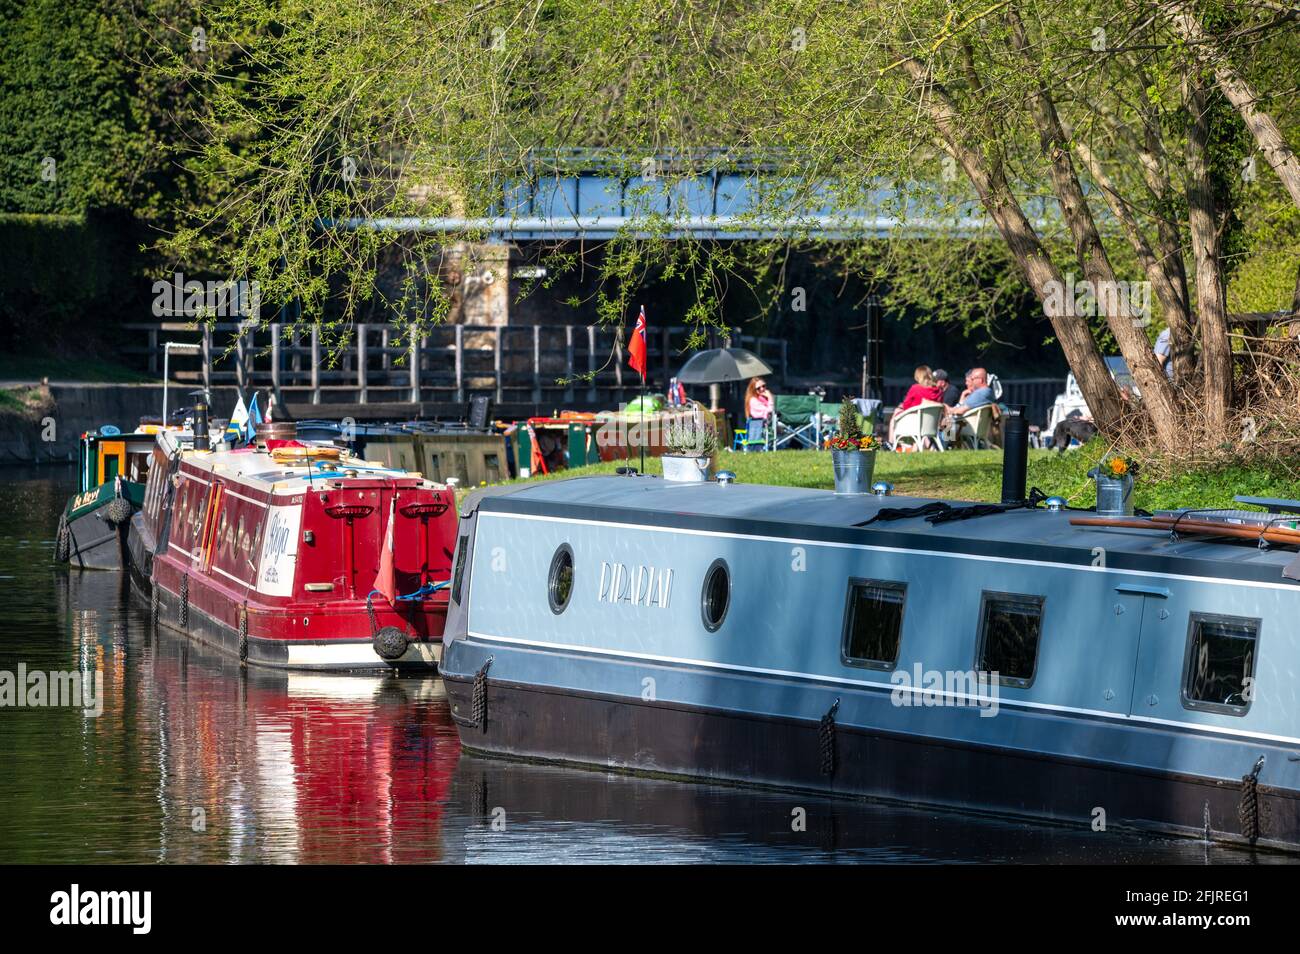 Canal boat cruisers on the South Yorkshire Navigational Canal at Sprotbrough Stock Photo